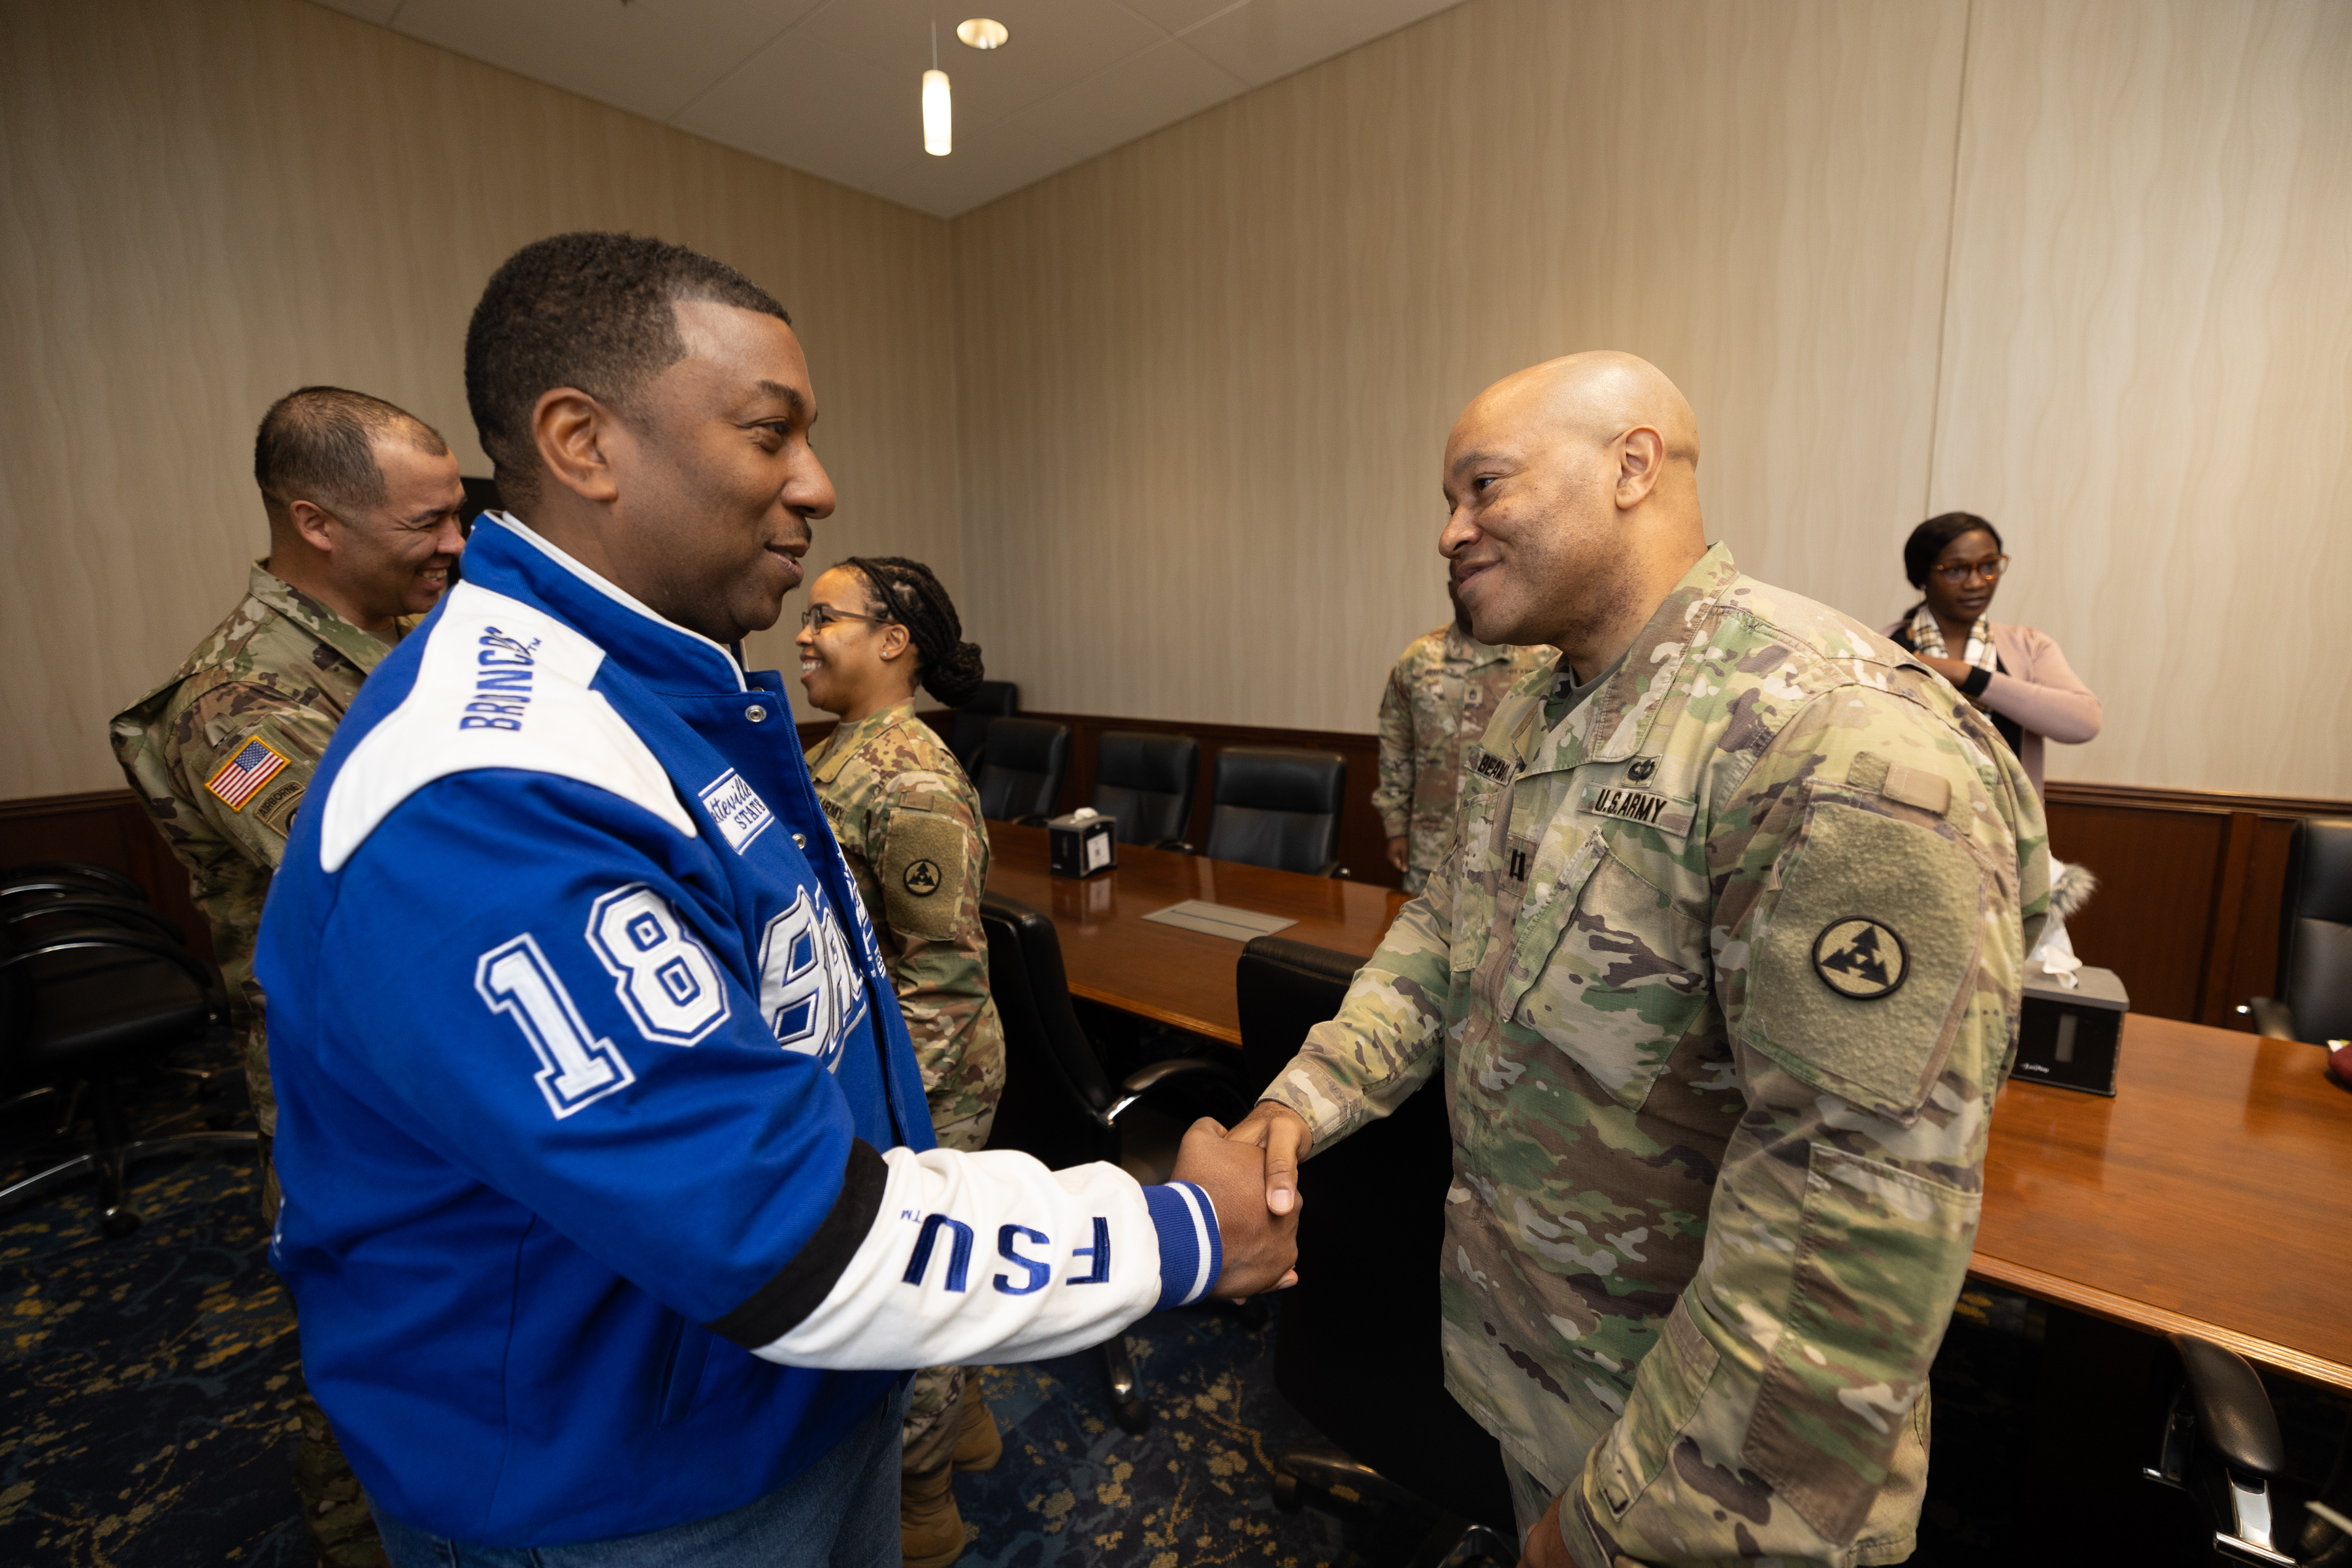 Chancellor Allison shaking hands with Active-Duty Alumni